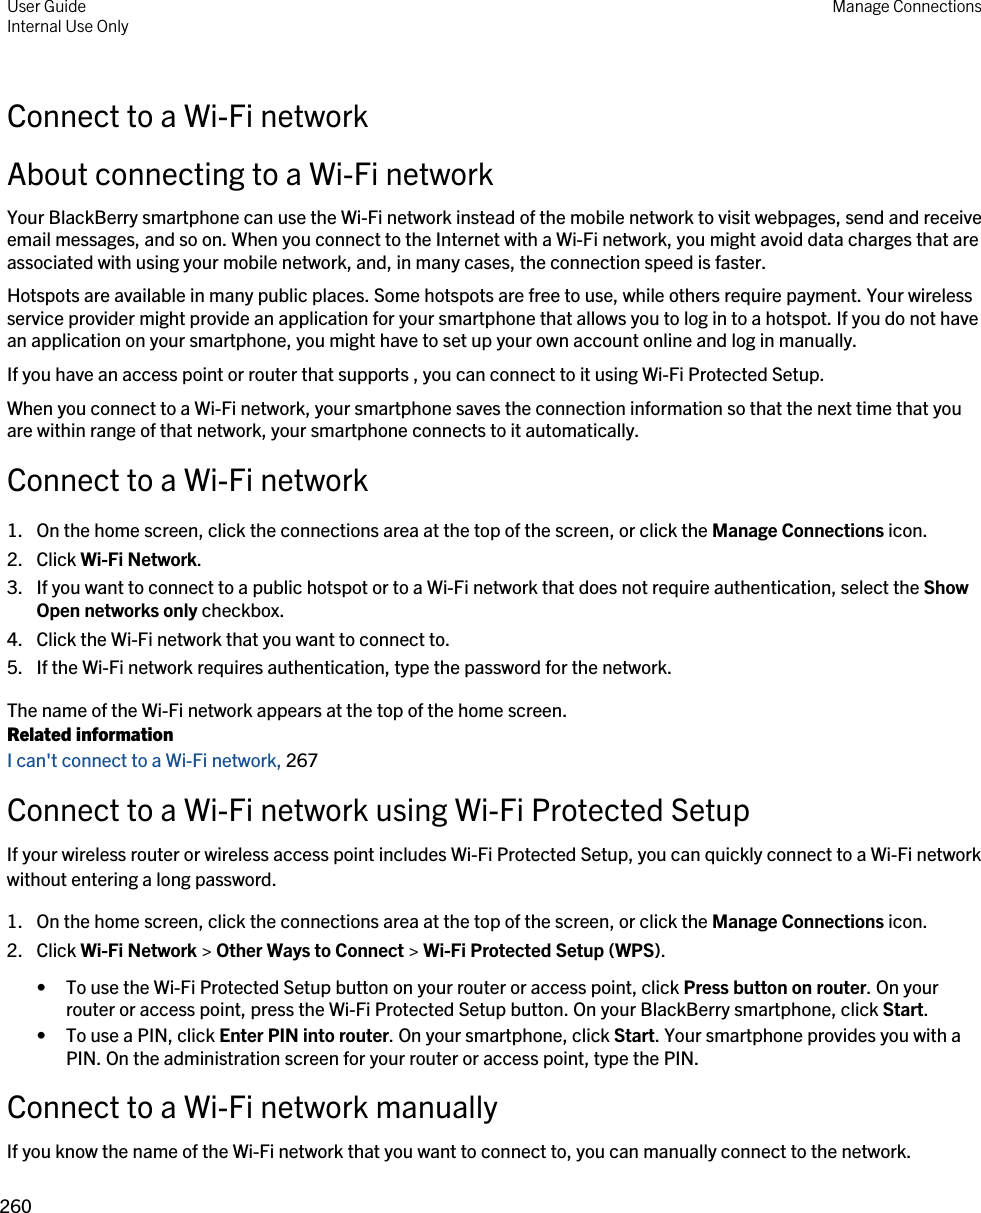 Connect to a Wi-Fi networkAbout connecting to a Wi-Fi networkYour BlackBerry smartphone can use the Wi-Fi network instead of the mobile network to visit webpages, send and receive email messages, and so on. When you connect to the Internet with a Wi-Fi network, you might avoid data charges that are associated with using your mobile network, and, in many cases, the connection speed is faster.Hotspots are available in many public places. Some hotspots are free to use, while others require payment. Your wireless service provider might provide an application for your smartphone that allows you to log in to a hotspot. If you do not have an application on your smartphone, you might have to set up your own account online and log in manually.If you have an access point or router that supports , you can connect to it using Wi-Fi Protected Setup.When you connect to a Wi-Fi network, your smartphone saves the connection information so that the next time that you are within range of that network, your smartphone connects to it automatically.Connect to a Wi-Fi network1. On the home screen, click the connections area at the top of the screen, or click the Manage Connections icon.2. Click Wi-Fi Network.3. If you want to connect to a public hotspot or to a Wi-Fi network that does not require authentication, select the Show Open networks only checkbox.4. Click the Wi-Fi network that you want to connect to.5. If the Wi-Fi network requires authentication, type the password for the network.The name of the Wi-Fi network appears at the top of the home screen.Related informationI can&apos;t connect to a Wi-Fi network, 267Connect to a Wi-Fi network using Wi-Fi Protected SetupIf your wireless router or wireless access point includes Wi-Fi Protected Setup, you can quickly connect to a Wi-Fi network without entering a long password.1. On the home screen, click the connections area at the top of the screen, or click the Manage Connections icon.2. Click Wi-Fi Network &gt; Other Ways to Connect &gt; Wi-Fi Protected Setup (WPS).• To use the Wi-Fi Protected Setup button on your router or access point, click Press button on router. On your router or access point, press the Wi-Fi Protected Setup button. On your BlackBerry smartphone, click Start.• To use a PIN, click Enter PIN into router. On your smartphone, click Start. Your smartphone provides you with a PIN. On the administration screen for your router or access point, type the PIN.Connect to a Wi-Fi network manuallyIf you know the name of the Wi-Fi network that you want to connect to, you can manually connect to the network.User GuideInternal Use Only Manage Connections260 